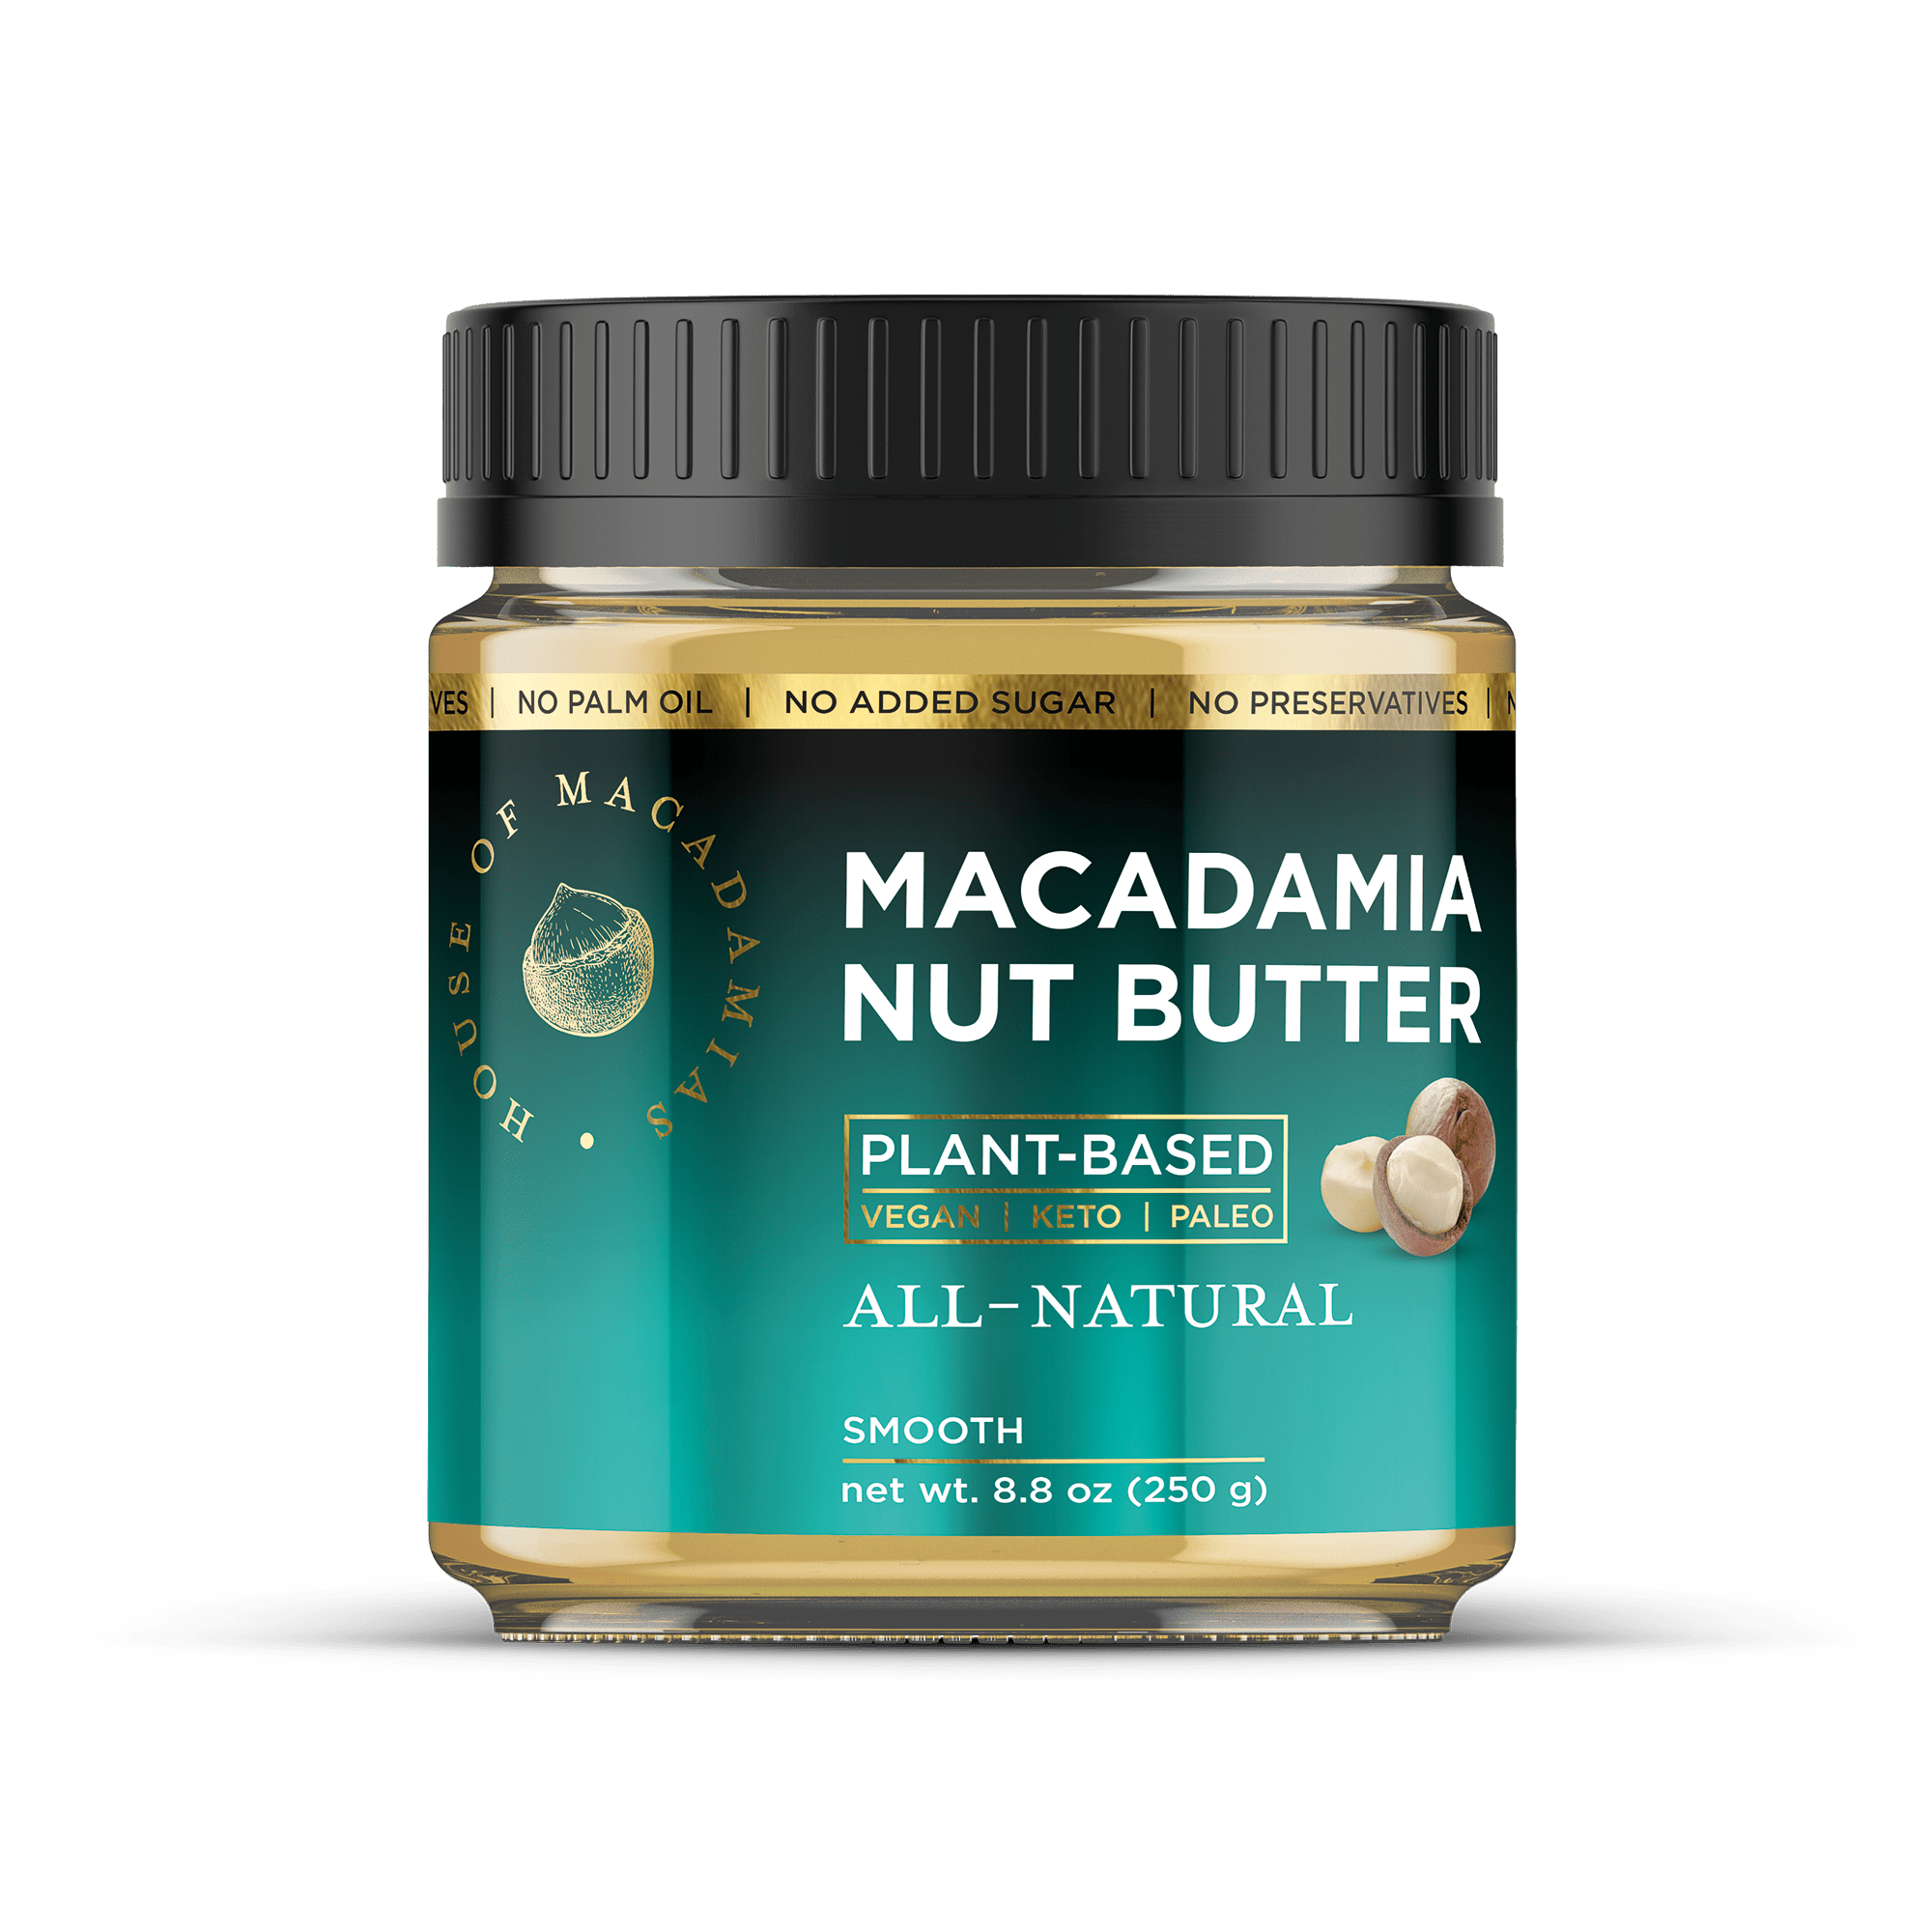 Macadamia Nut Butter All Natural Flavor (1 Flavor, 2 Jars) - House of Macadamias - best late night snacks